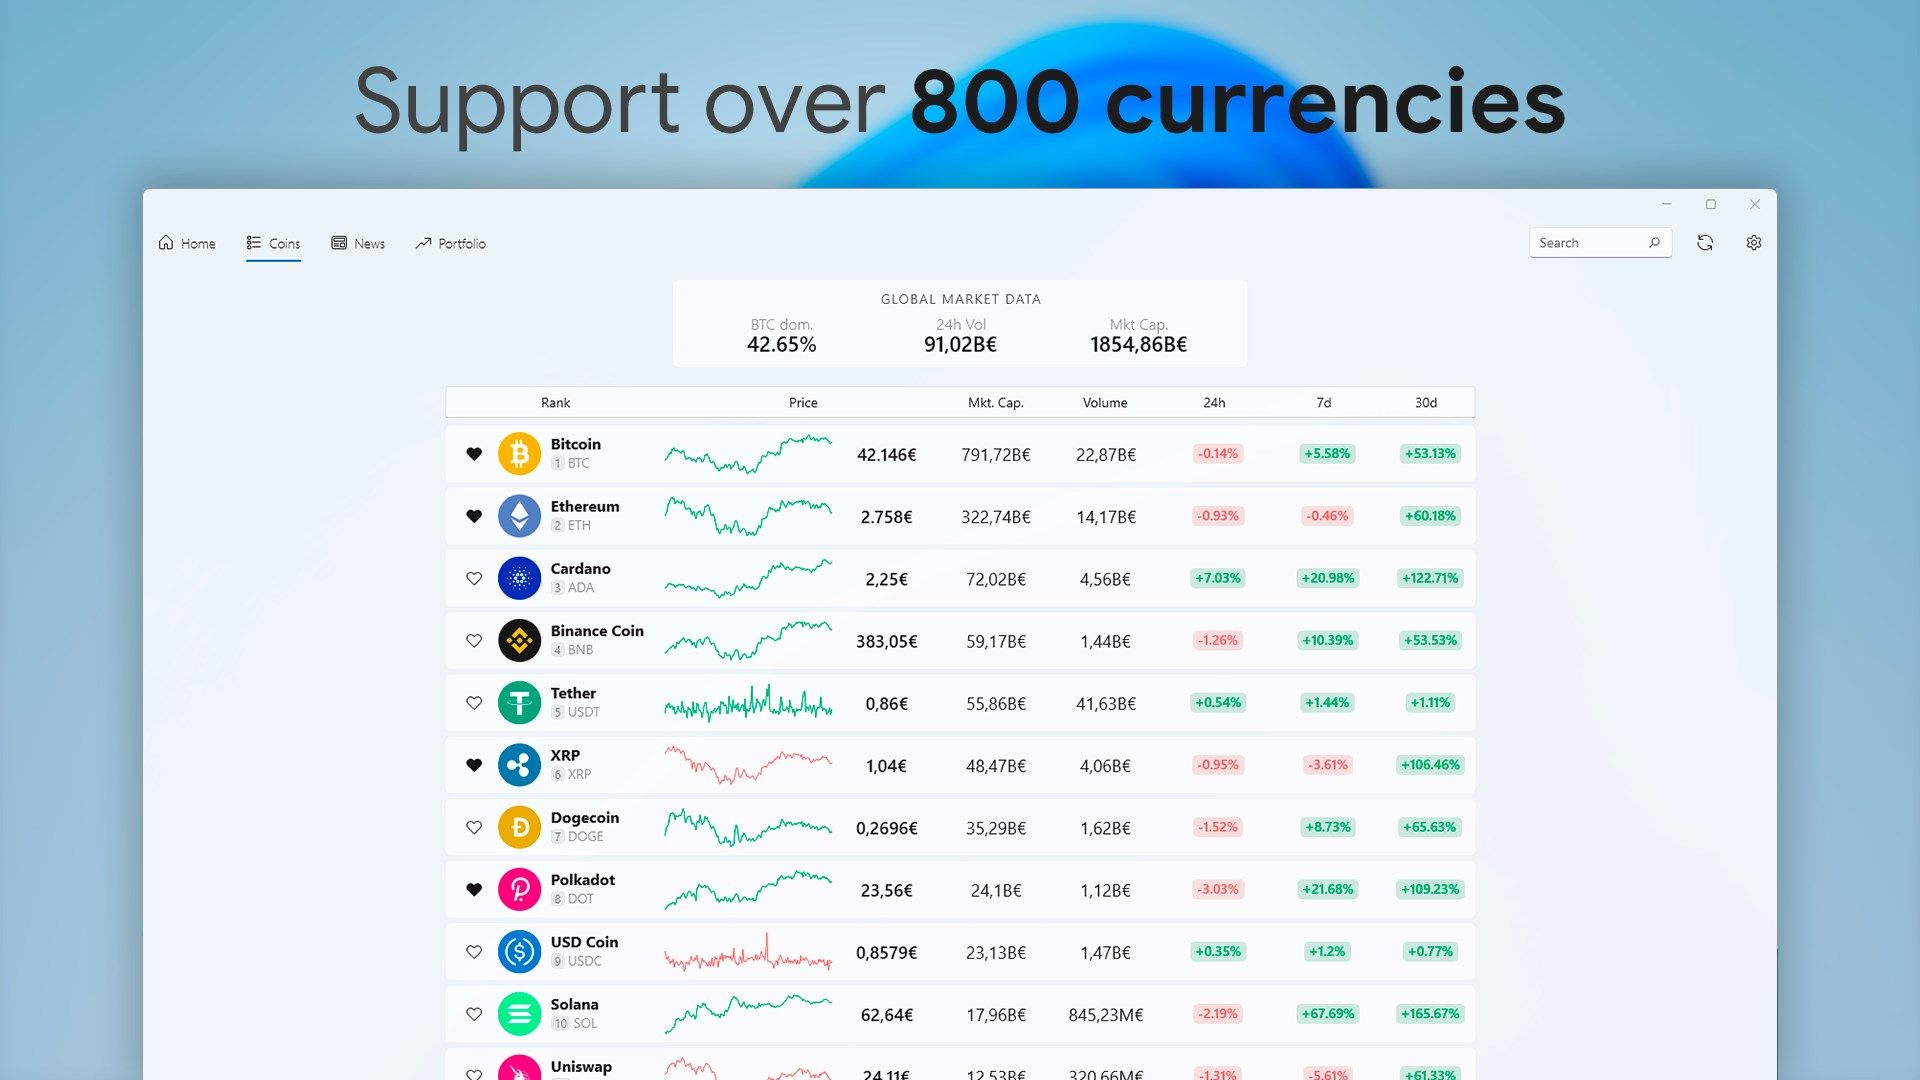 Supports over 800 currencies